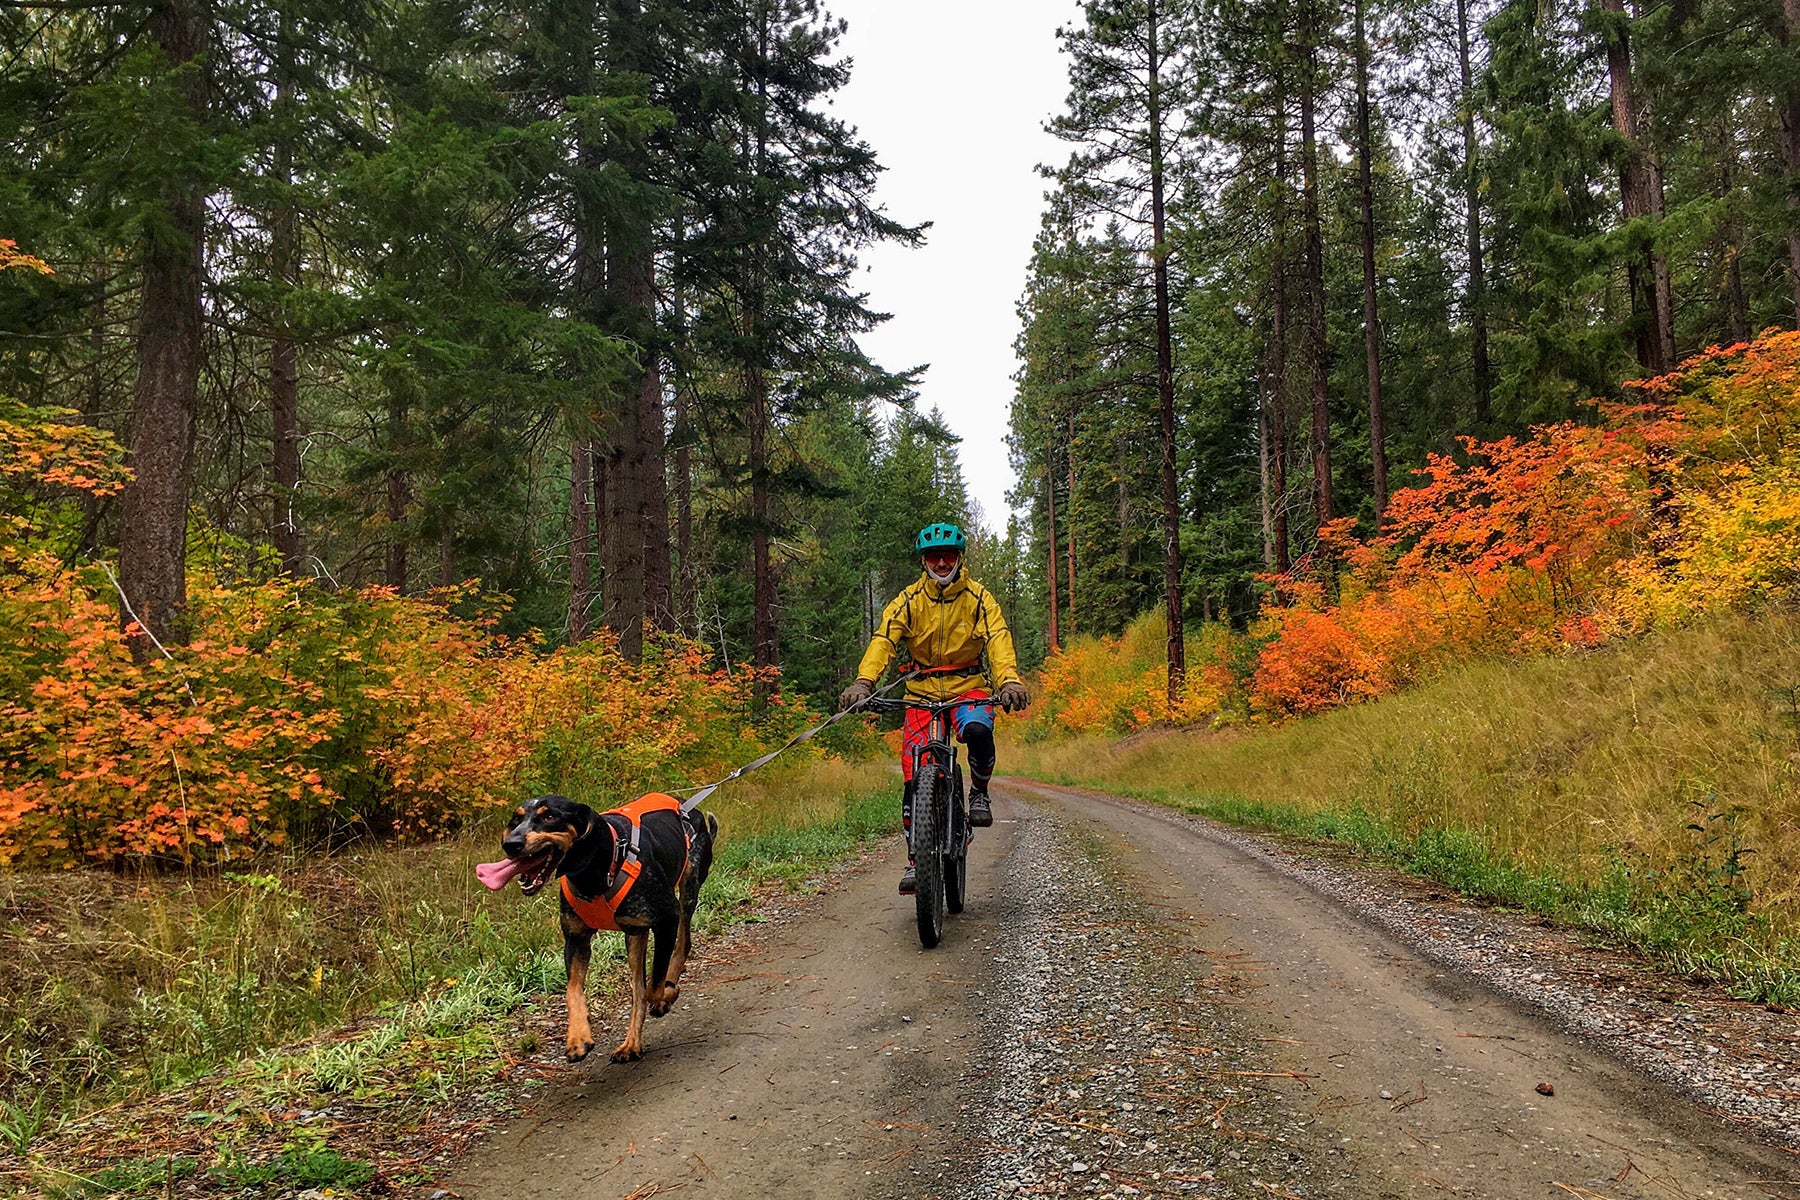 Human bike-joring with dog on a dirt road with autumn foliage